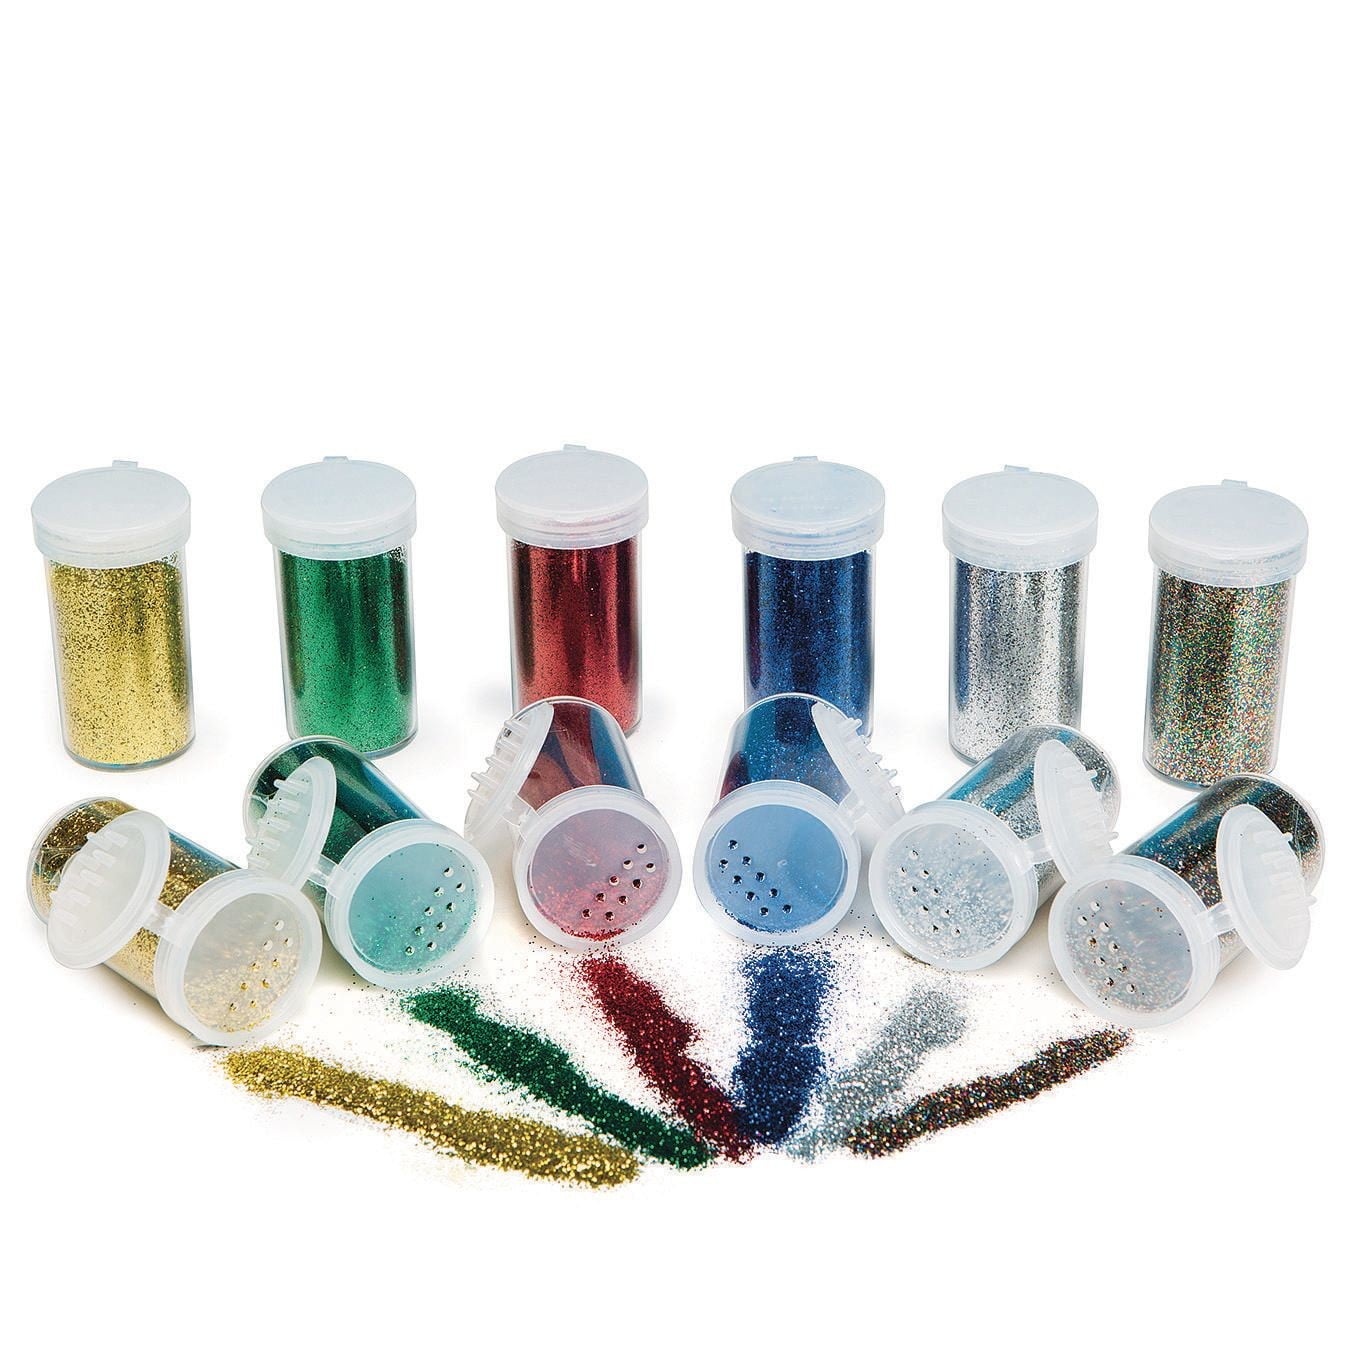 Assorted Glitter Set By Recollections - 12 pcs